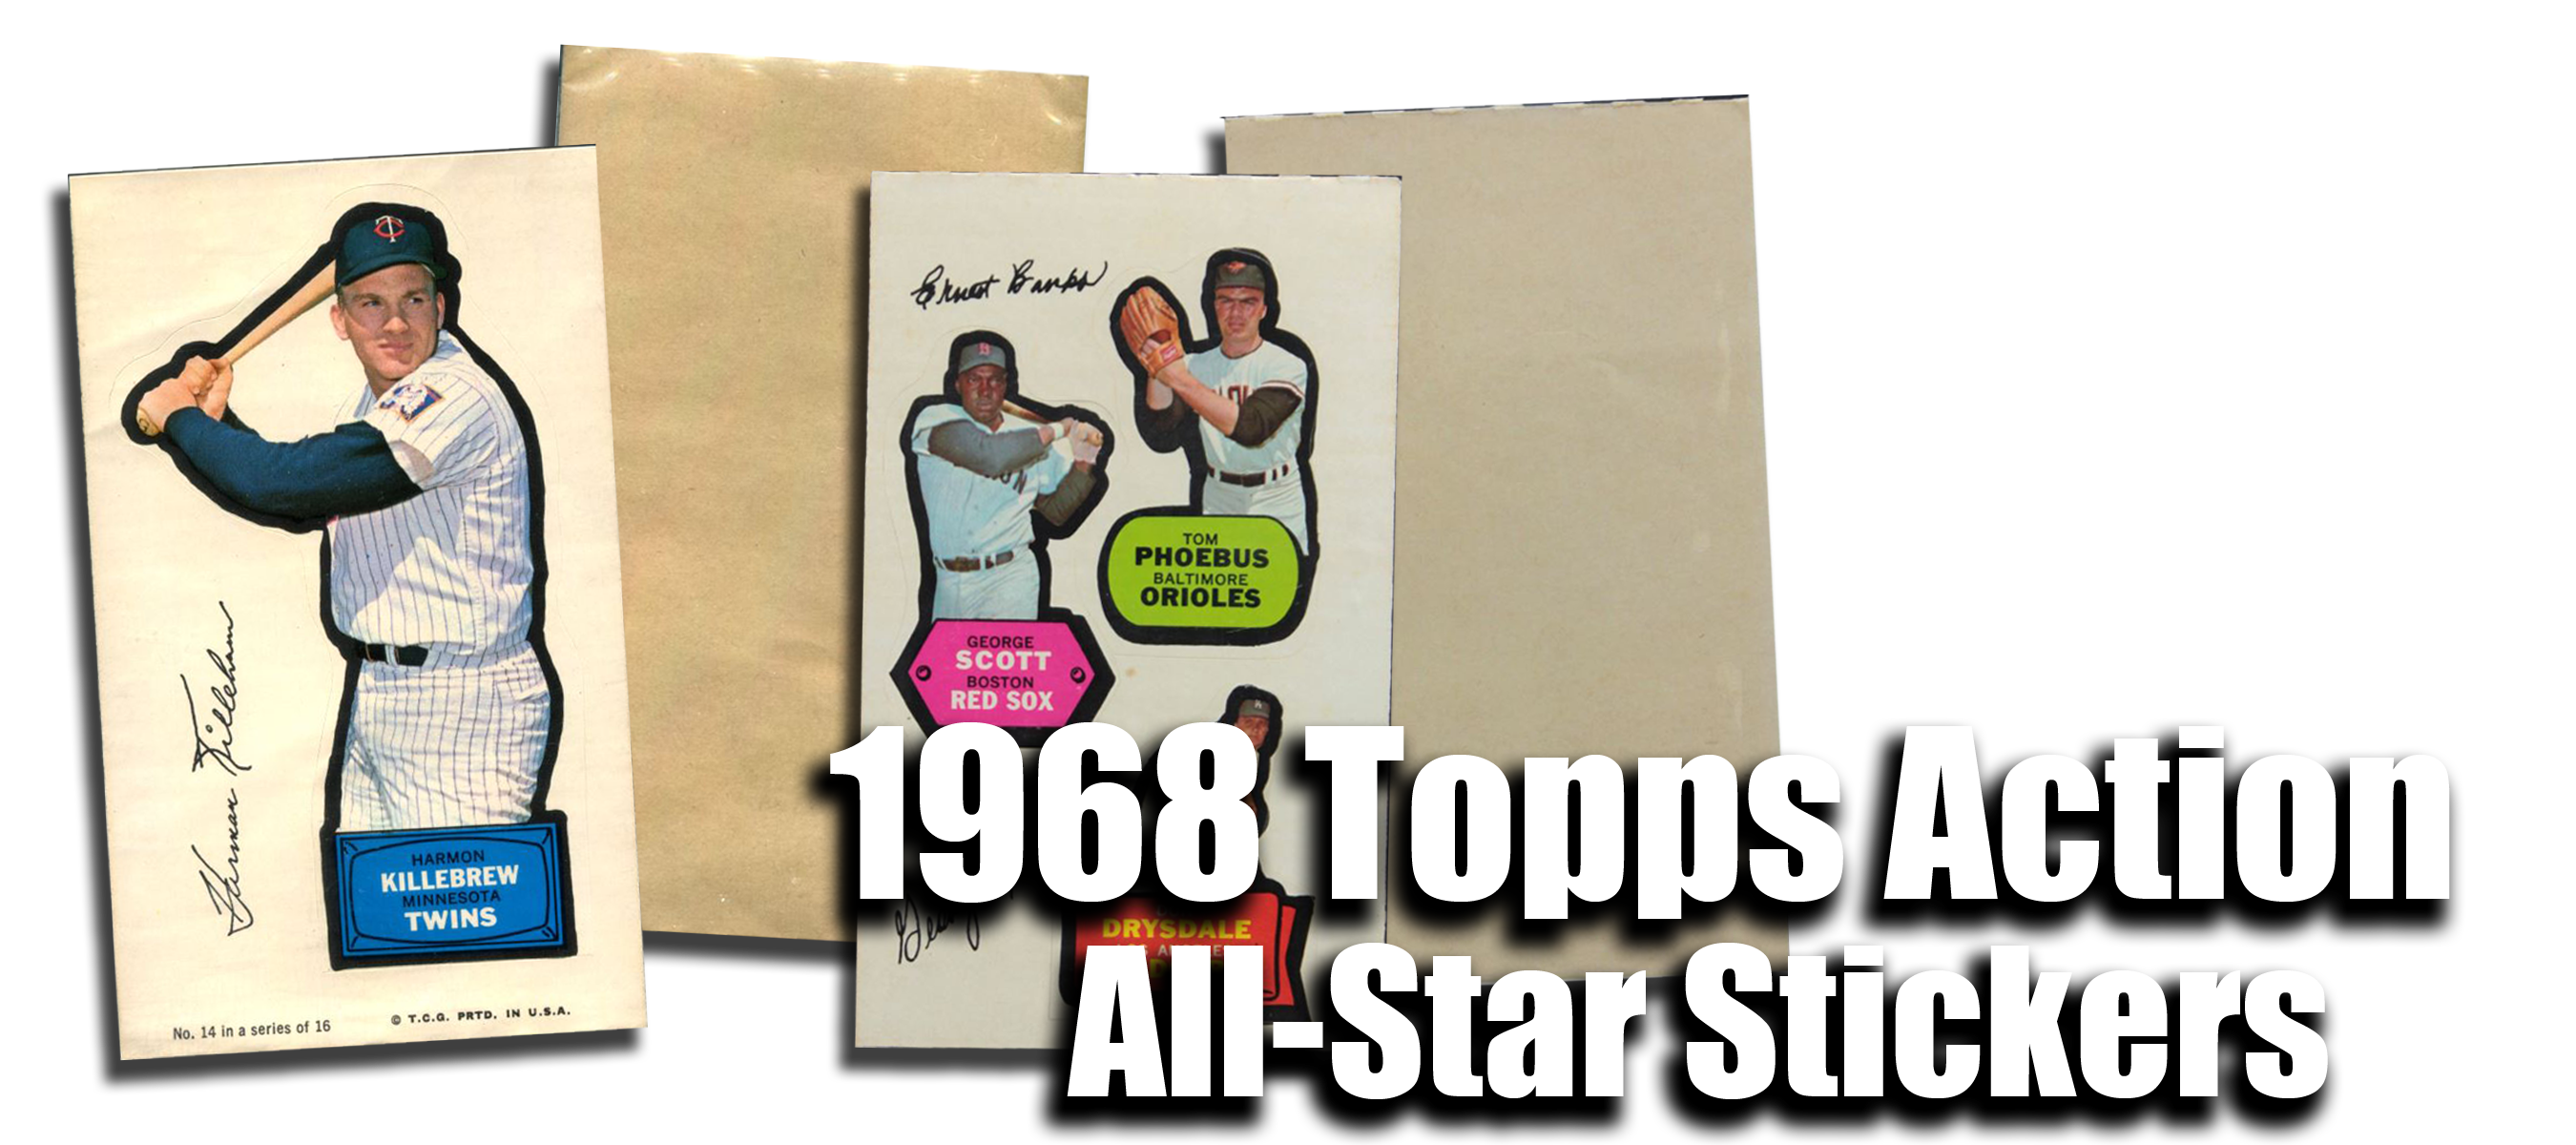 1968 Topps Action All-Star Stickers 